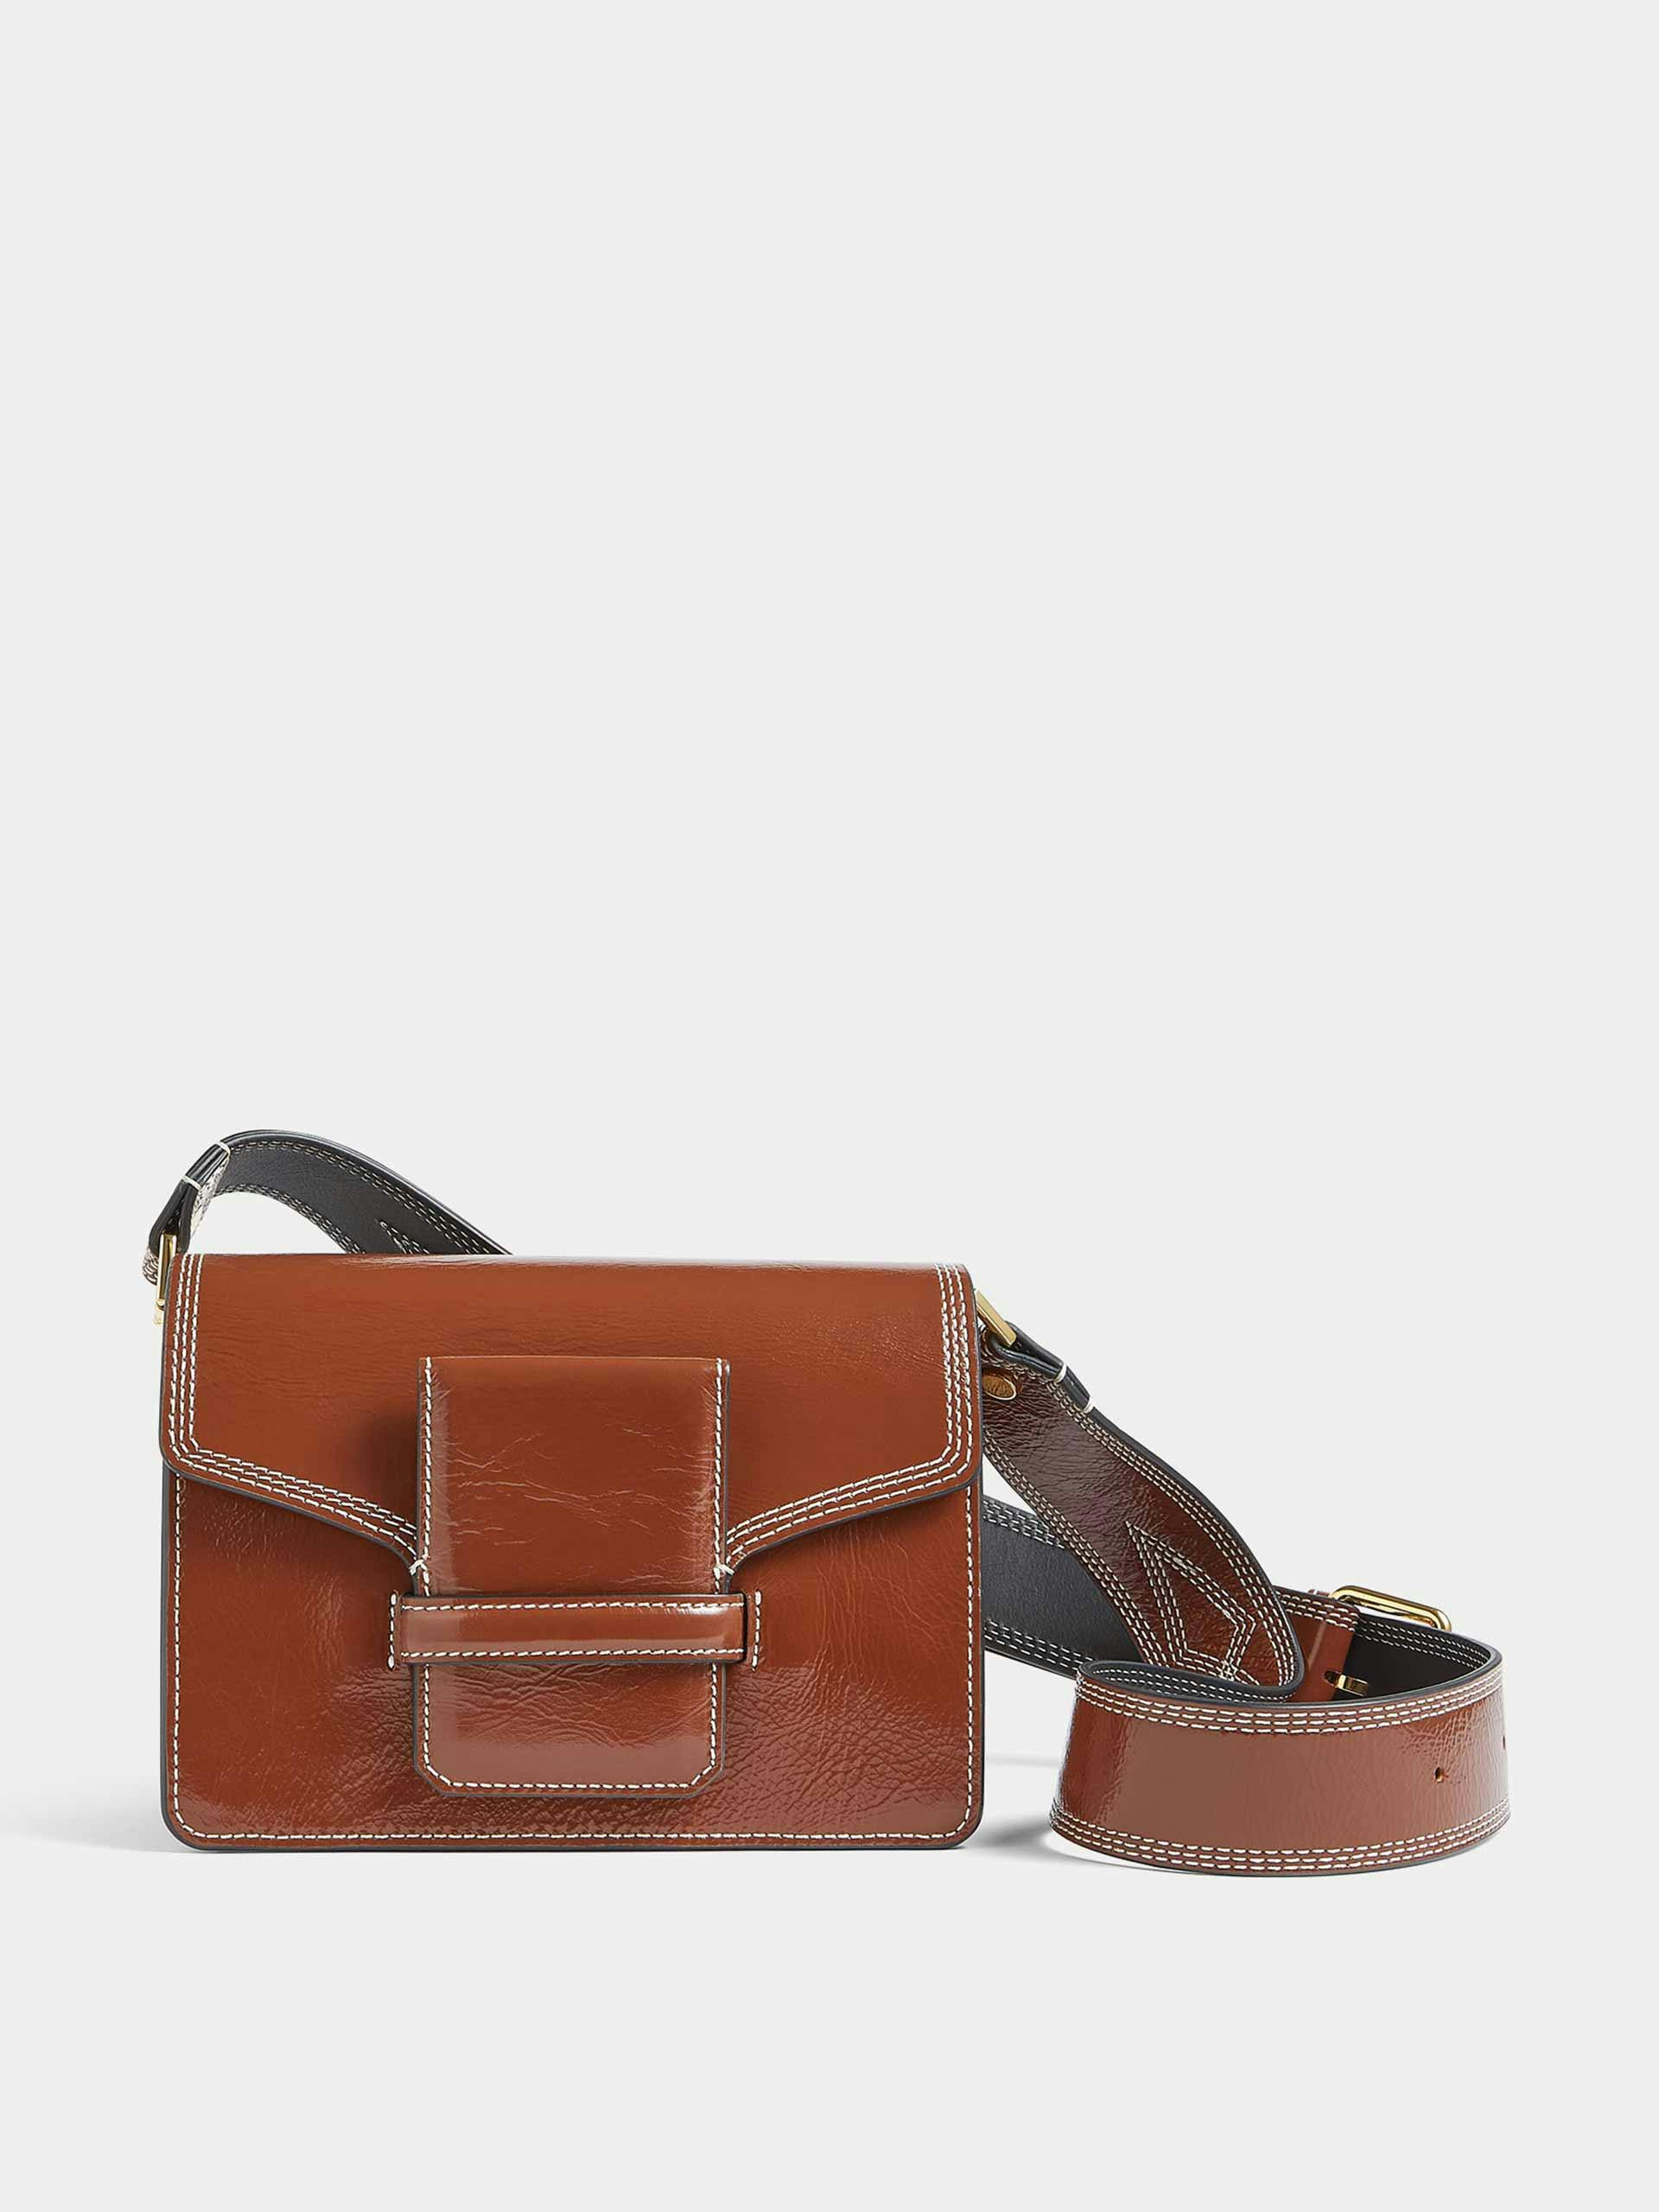 Ada leather bag with adjustable buckled strap